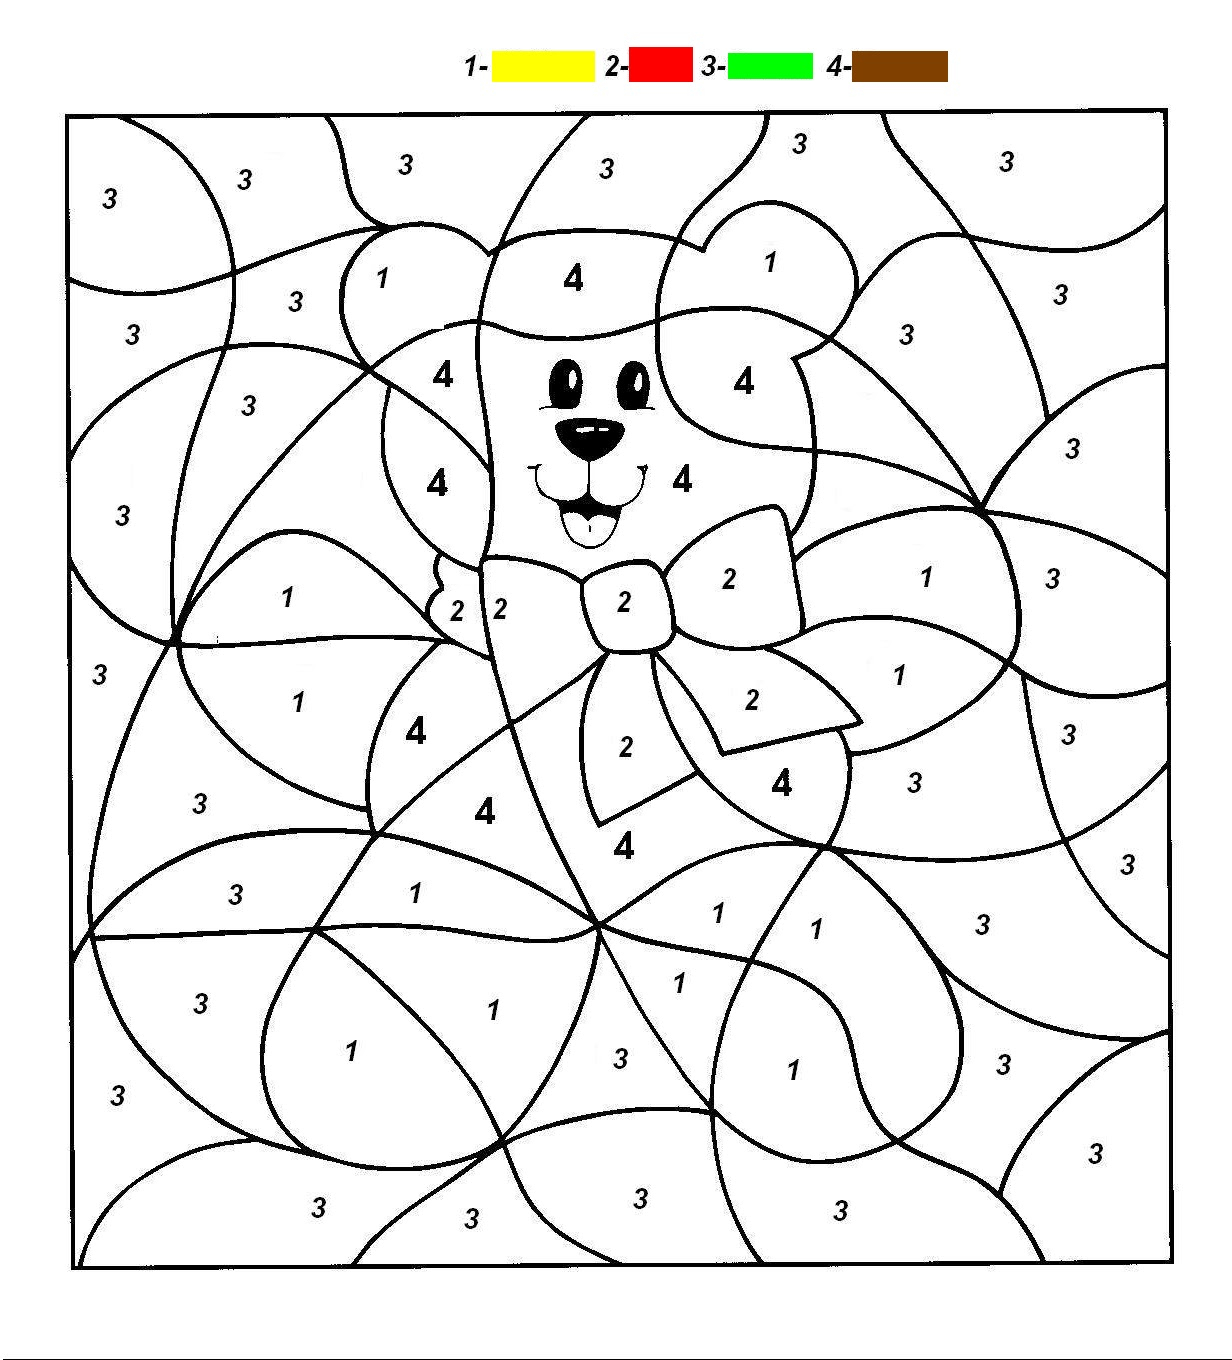 27+ Inspiration Image of Printable Number Coloring Pages